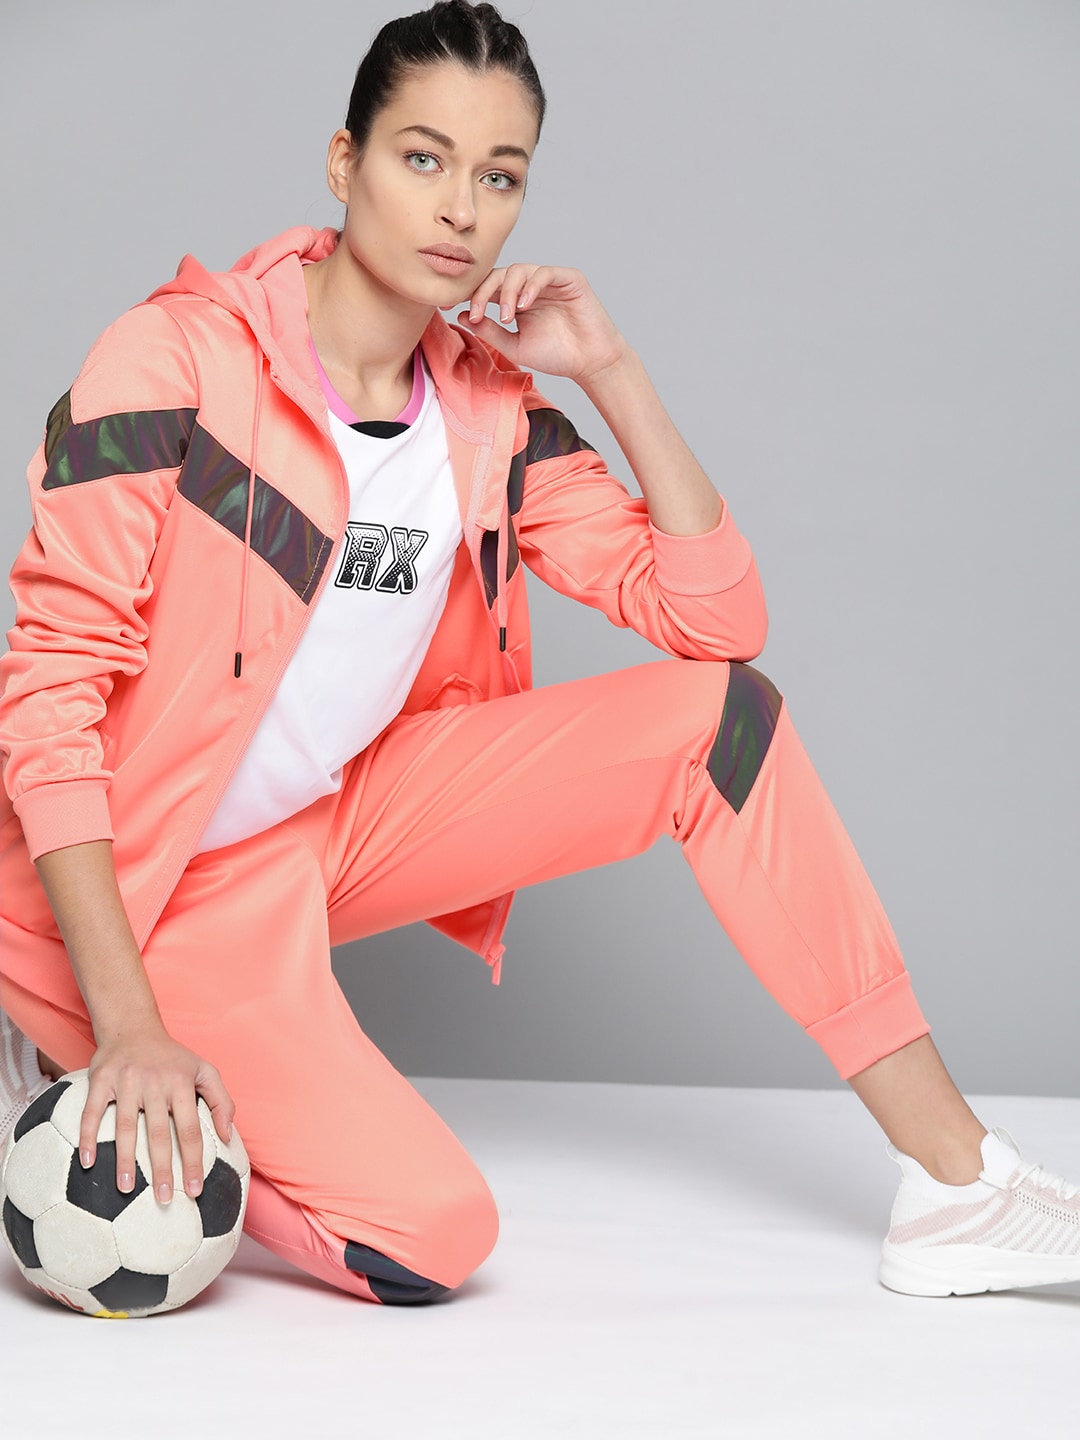 HRX by Hrithik Roshan Women Peach-Coloured & Grey Colourblocked Football Tracksuit Price in India